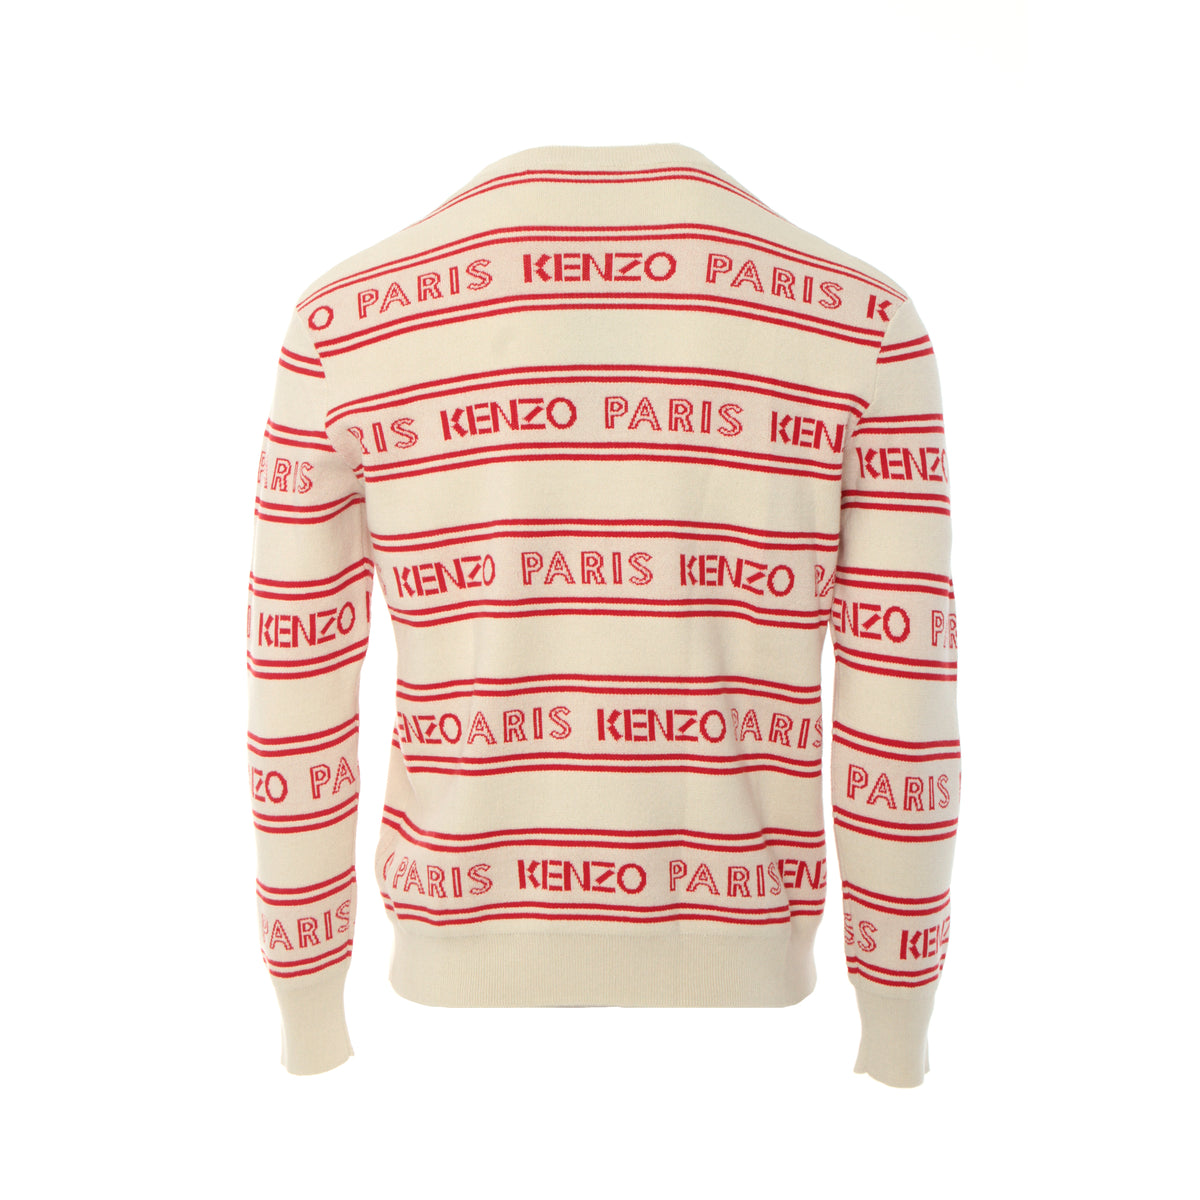 Kenzo Paris All Over Kenzo Jacquard Beige Red 